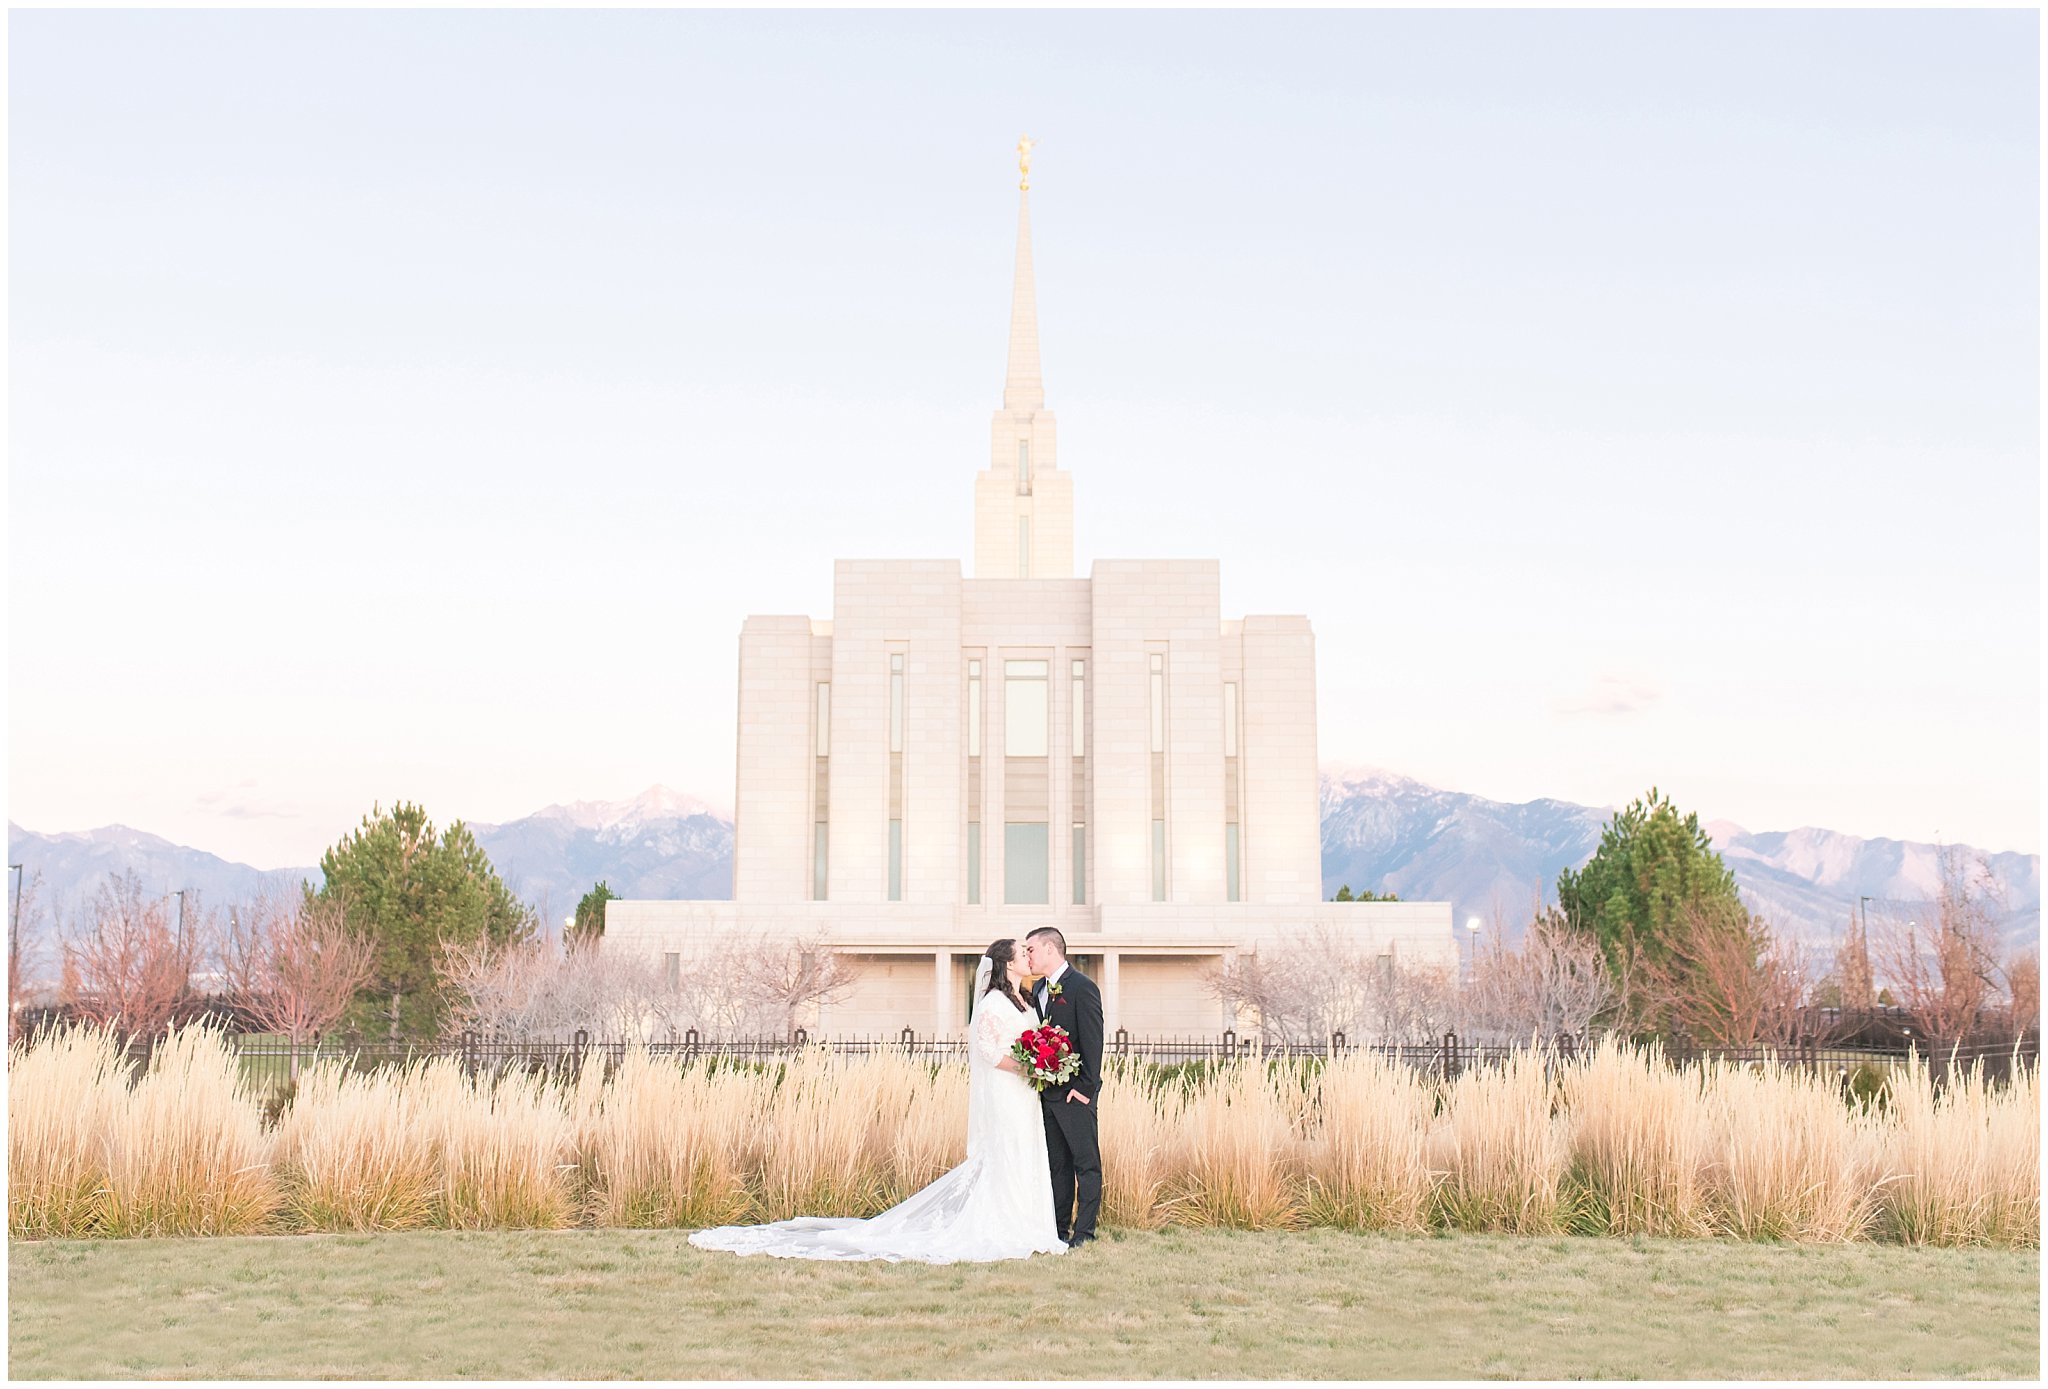 Bride and groom at sunset in at the Oquirrh Mountain Temple | Top Utah Wedding and Couples Photos 2019 | Jessie and Dallin Photography